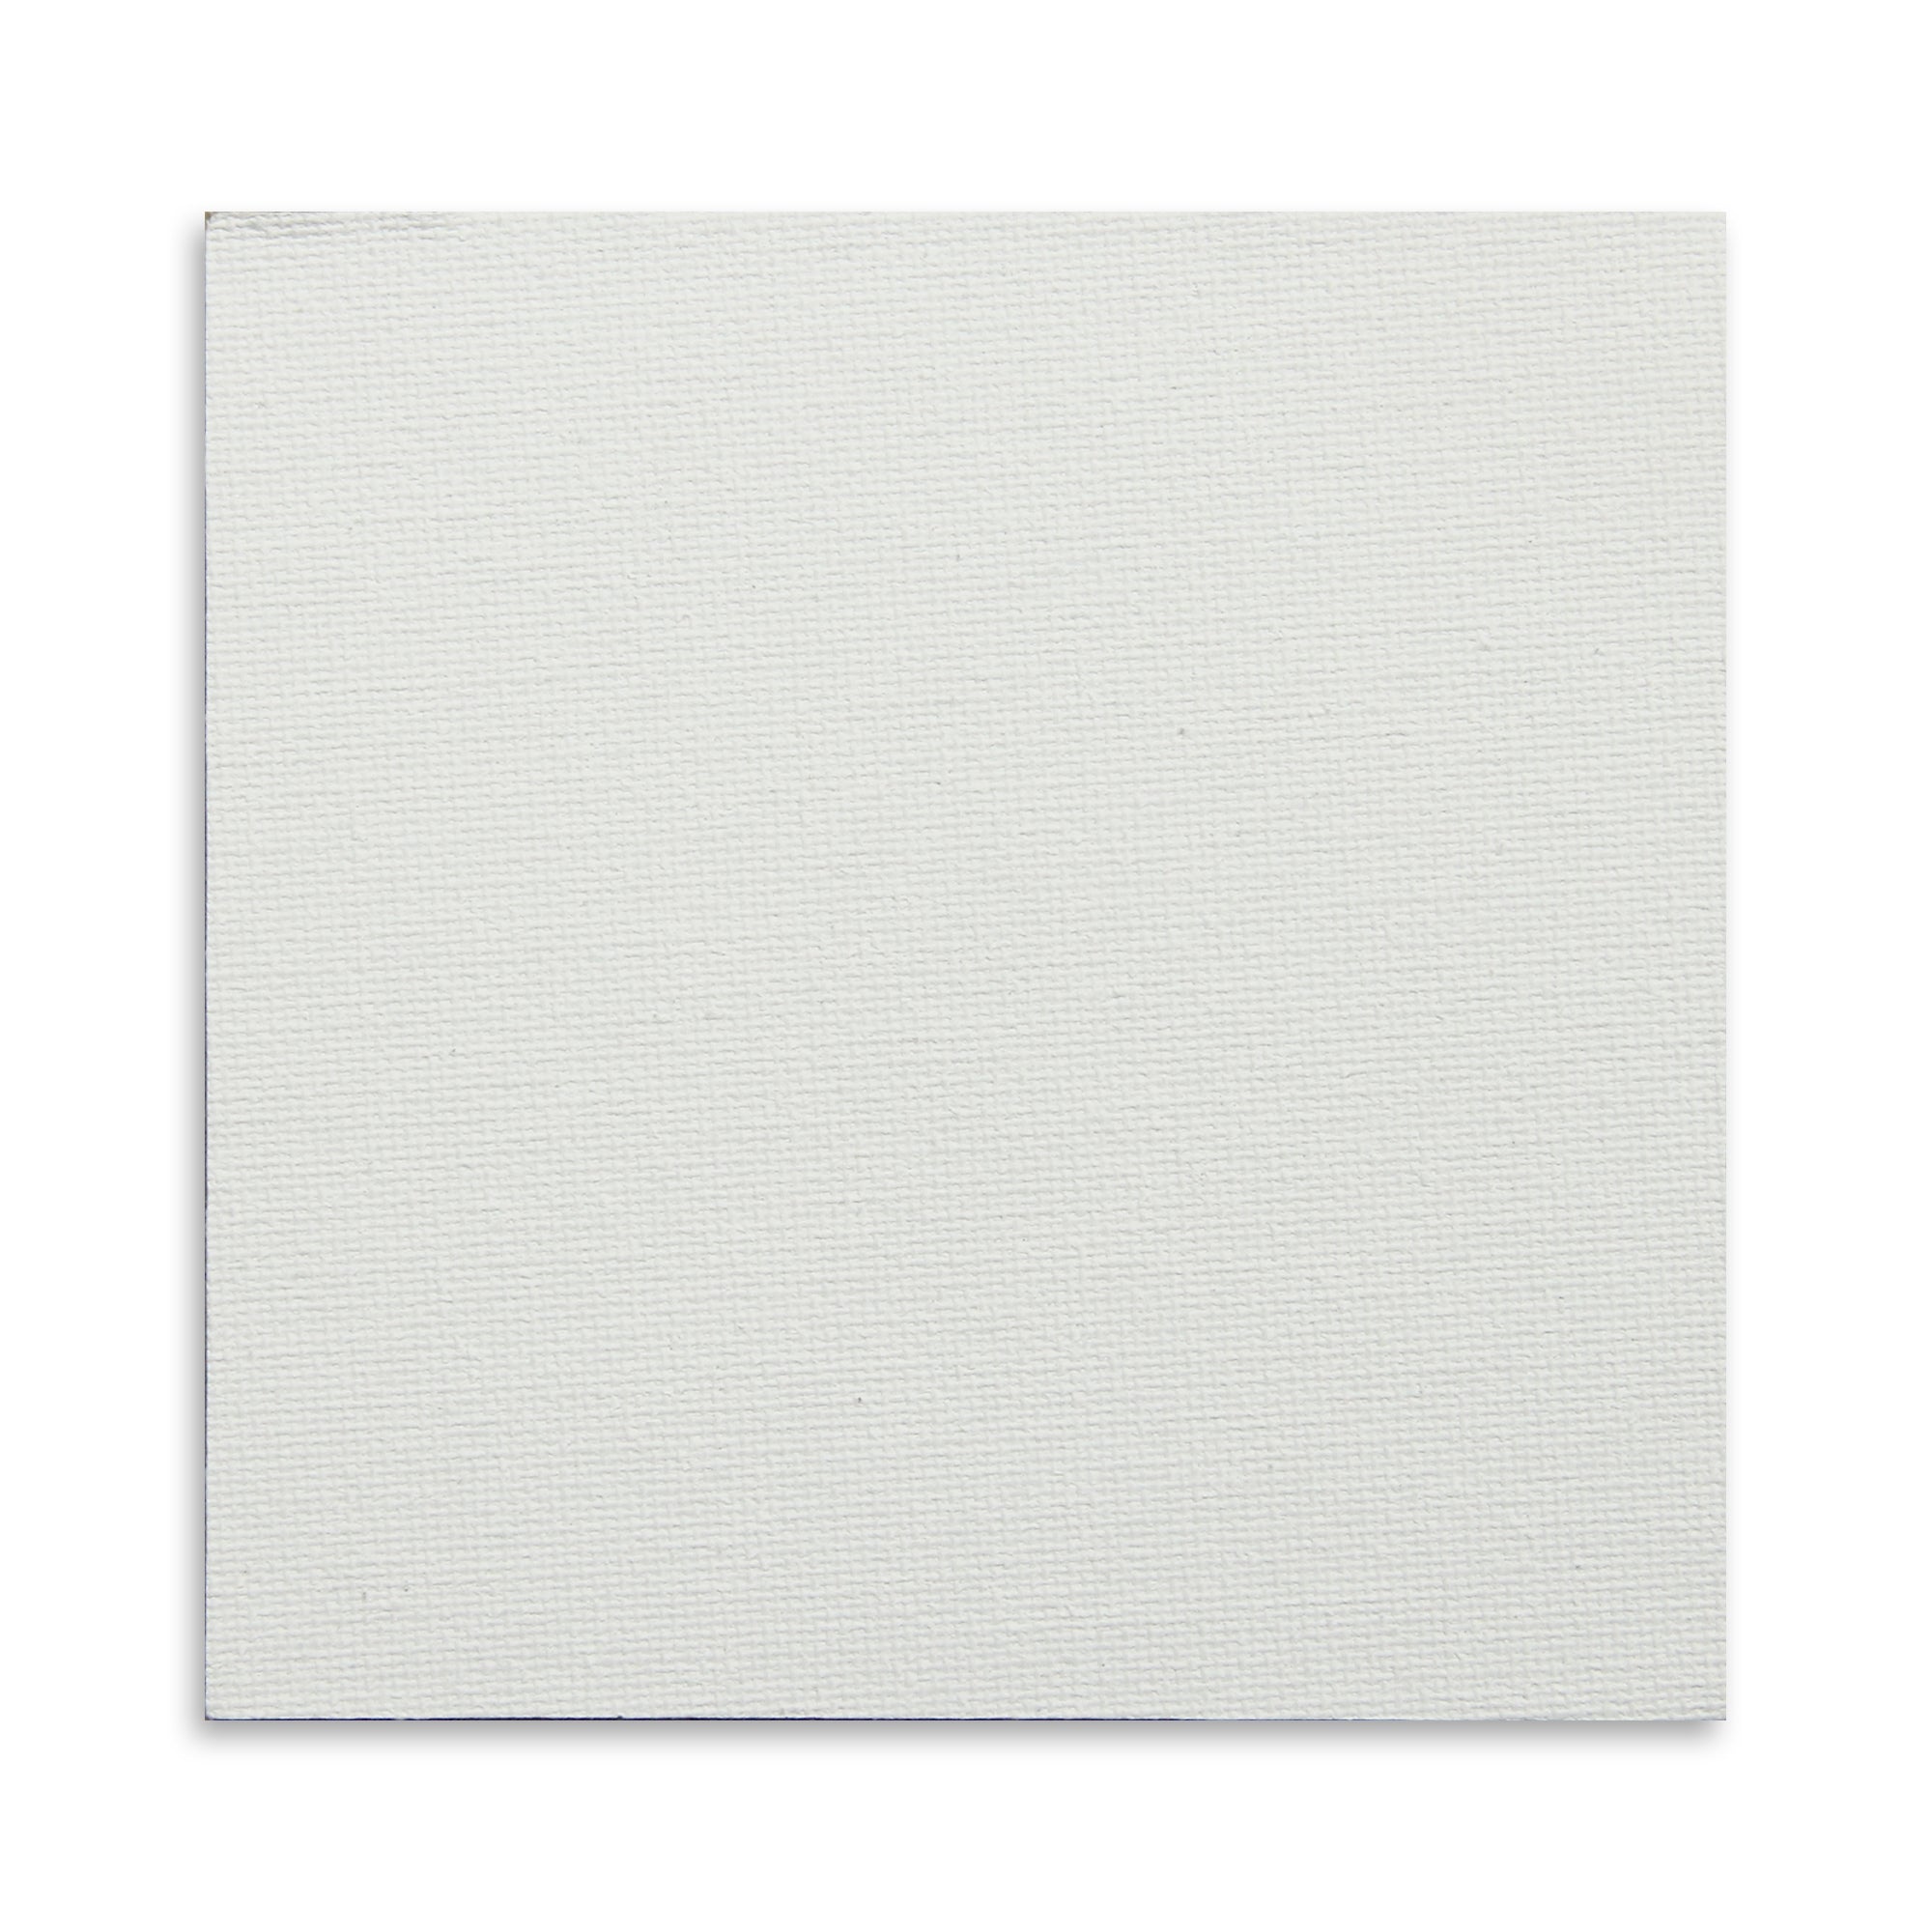 Canvas Board Square 6 X 6Inch 230Gsm 2Mm Thick 4Pc Shrink Lb